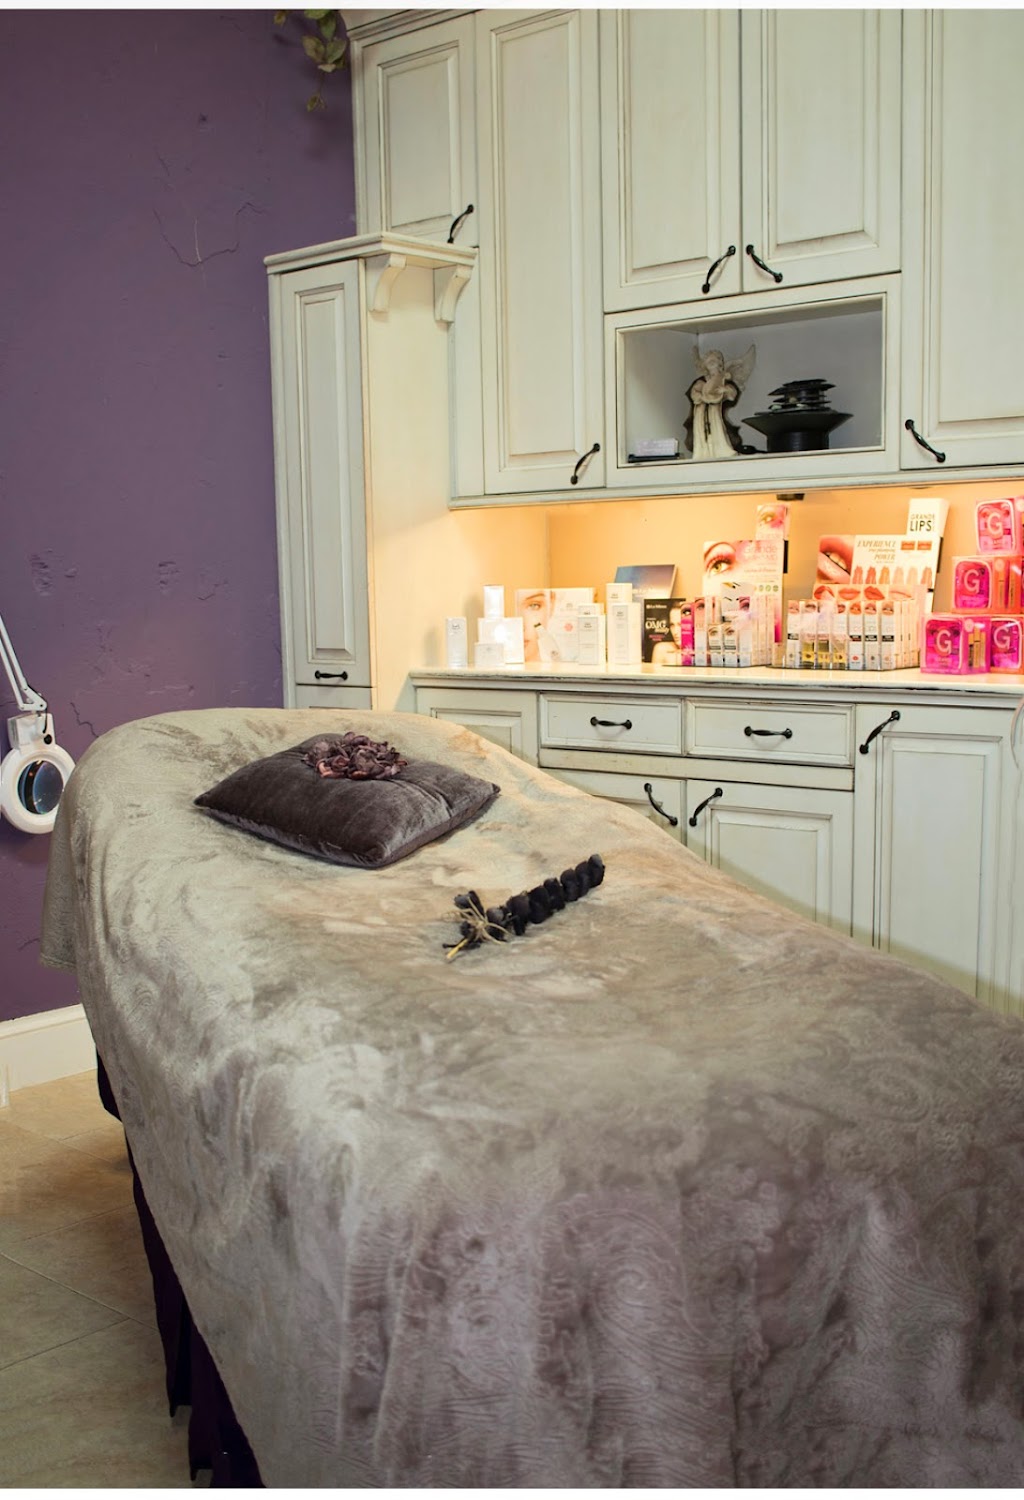 The Purple Door Day Spa | 114 W Main St, Pilot Point, TX 76258 | Phone: (940) 324-3003